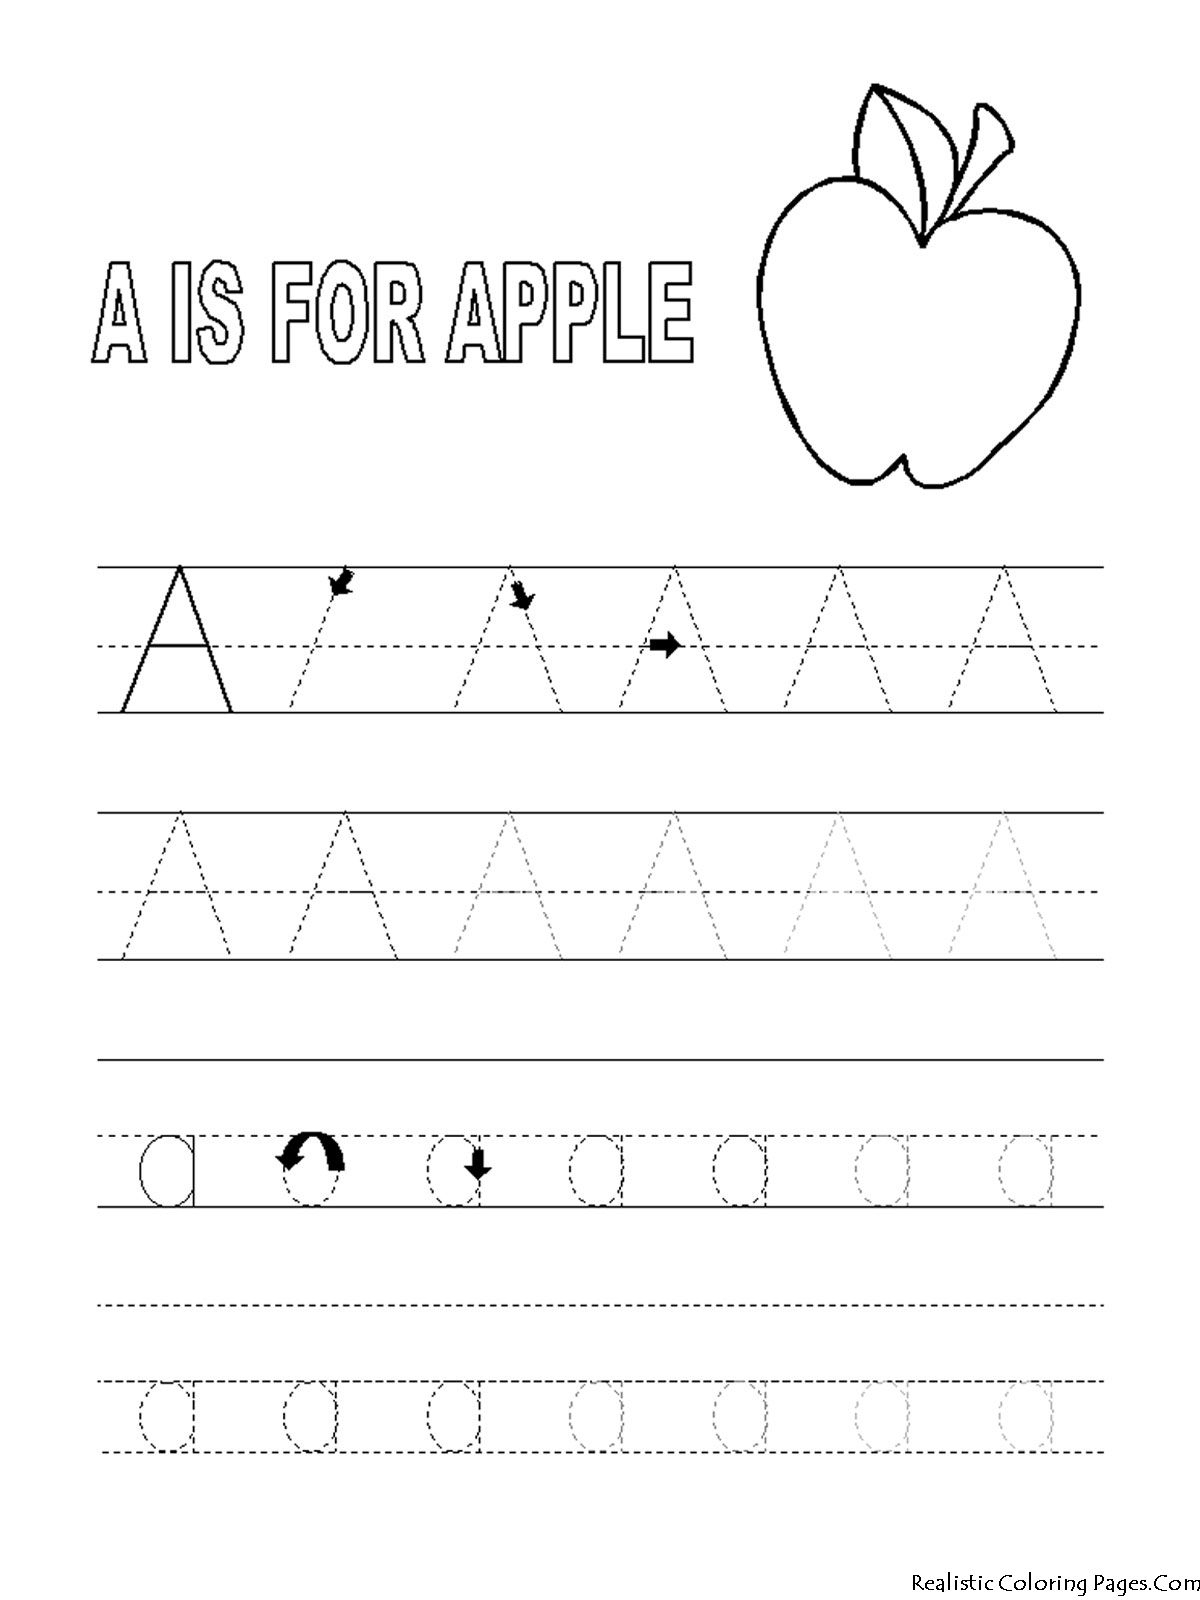 Alphabet Tracer Pages A For Apple | Coloring Pages | Pinterest - Free Printable Preschool Name Tracer Pages